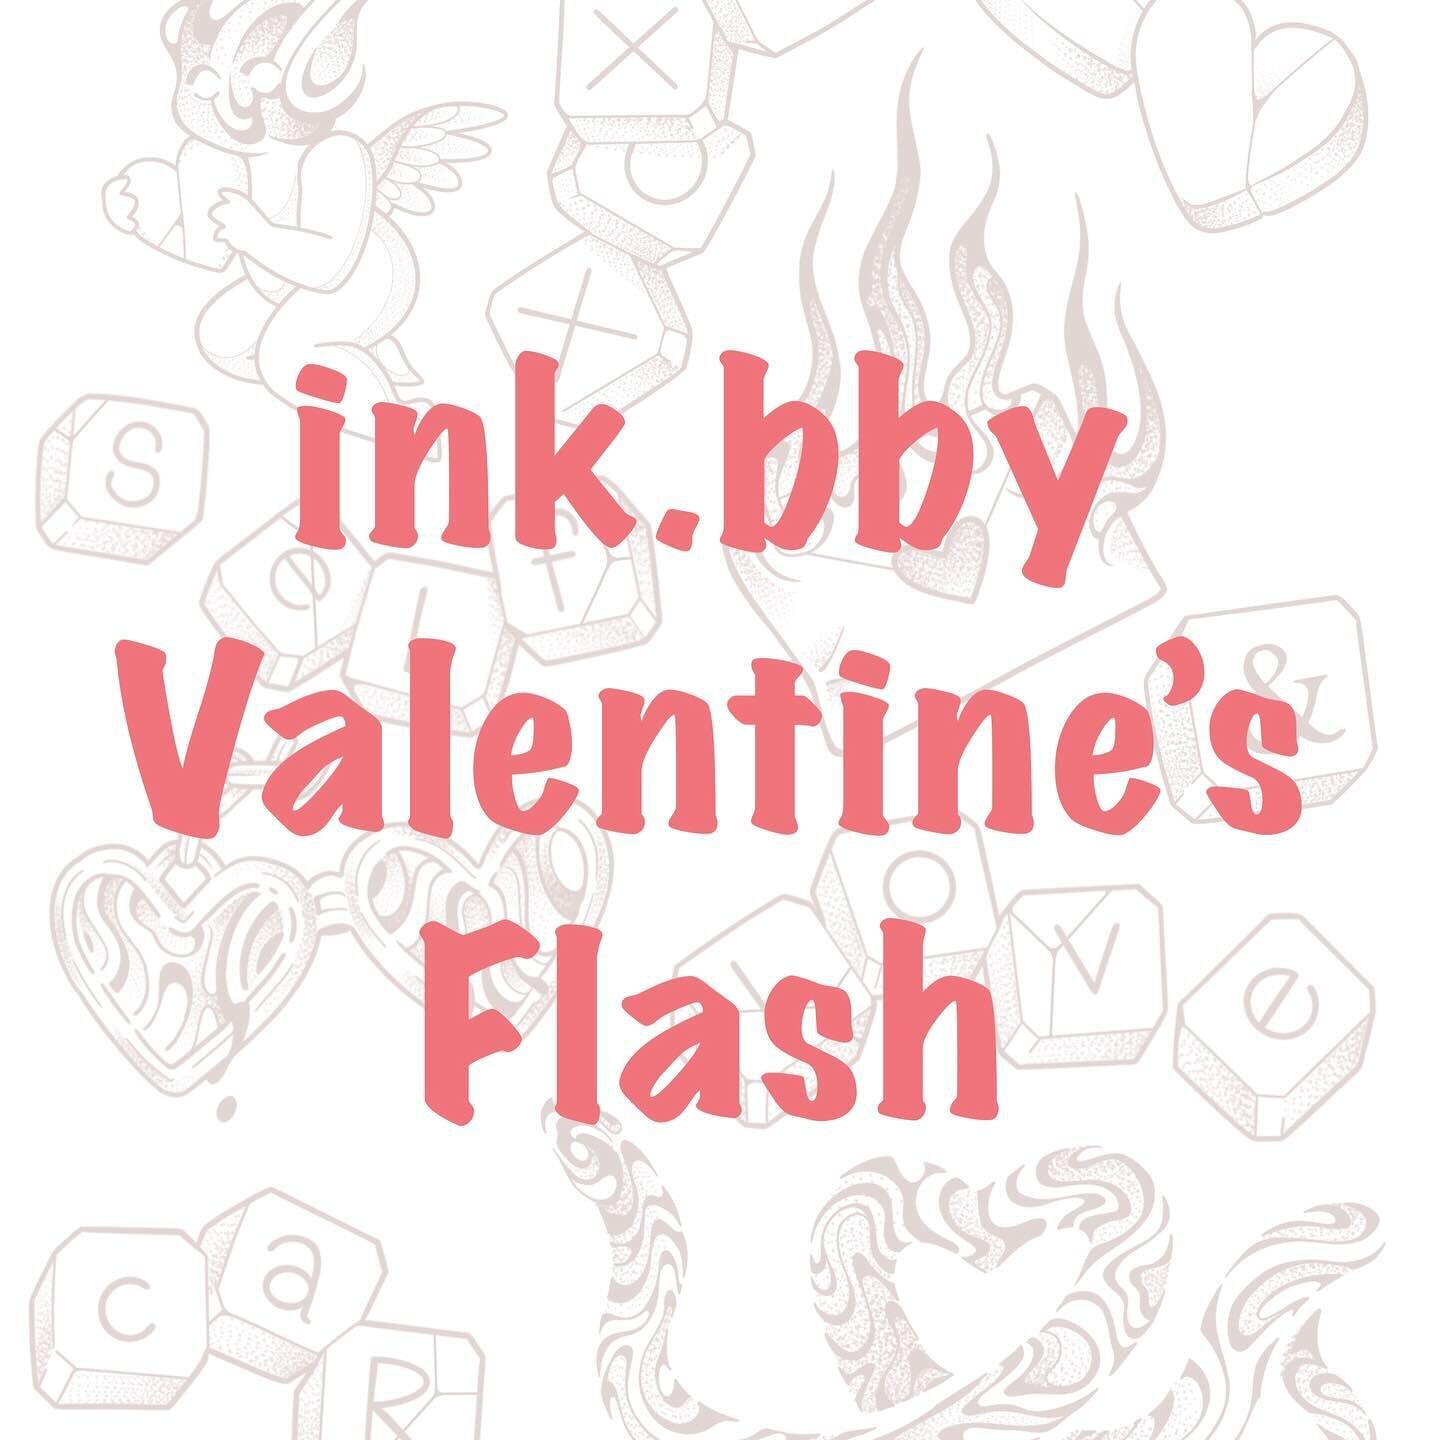 Here&rsquo;s my Valentines flash sheet for the month of February @stonegardentattoos 

Dm me to inquire, bookings in February take priority 🩷

#valentinestattoo #valentinetattooflash #valentinesday #calgaryvalentinesday #yyctattooflash #cutetattoos 